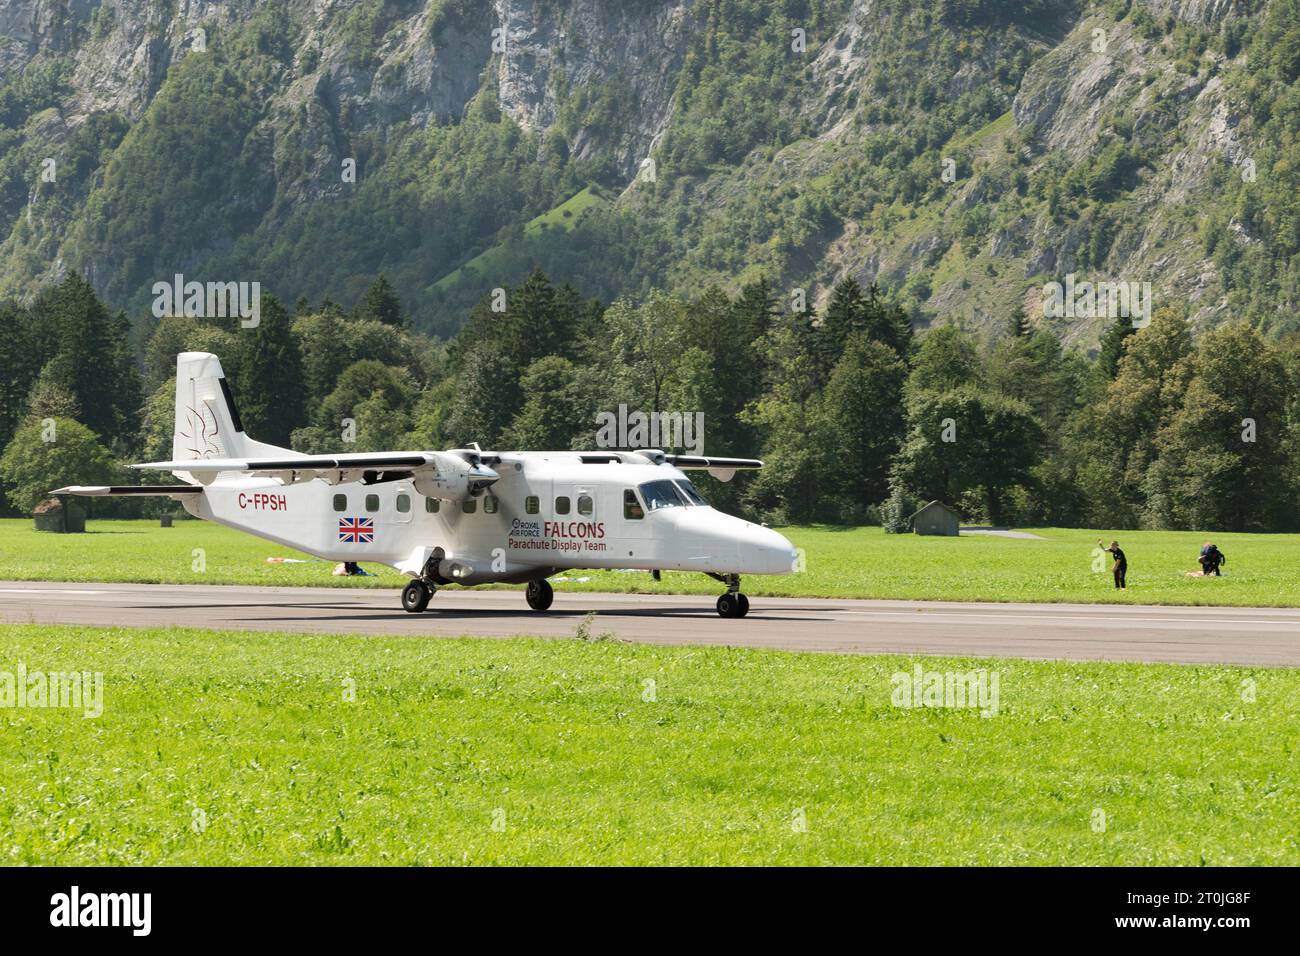 Mollis, Switzerland, August 18, 2023 C-FPSH Dornier 228-202 aircraft is taxiing on the runway Stock Photo